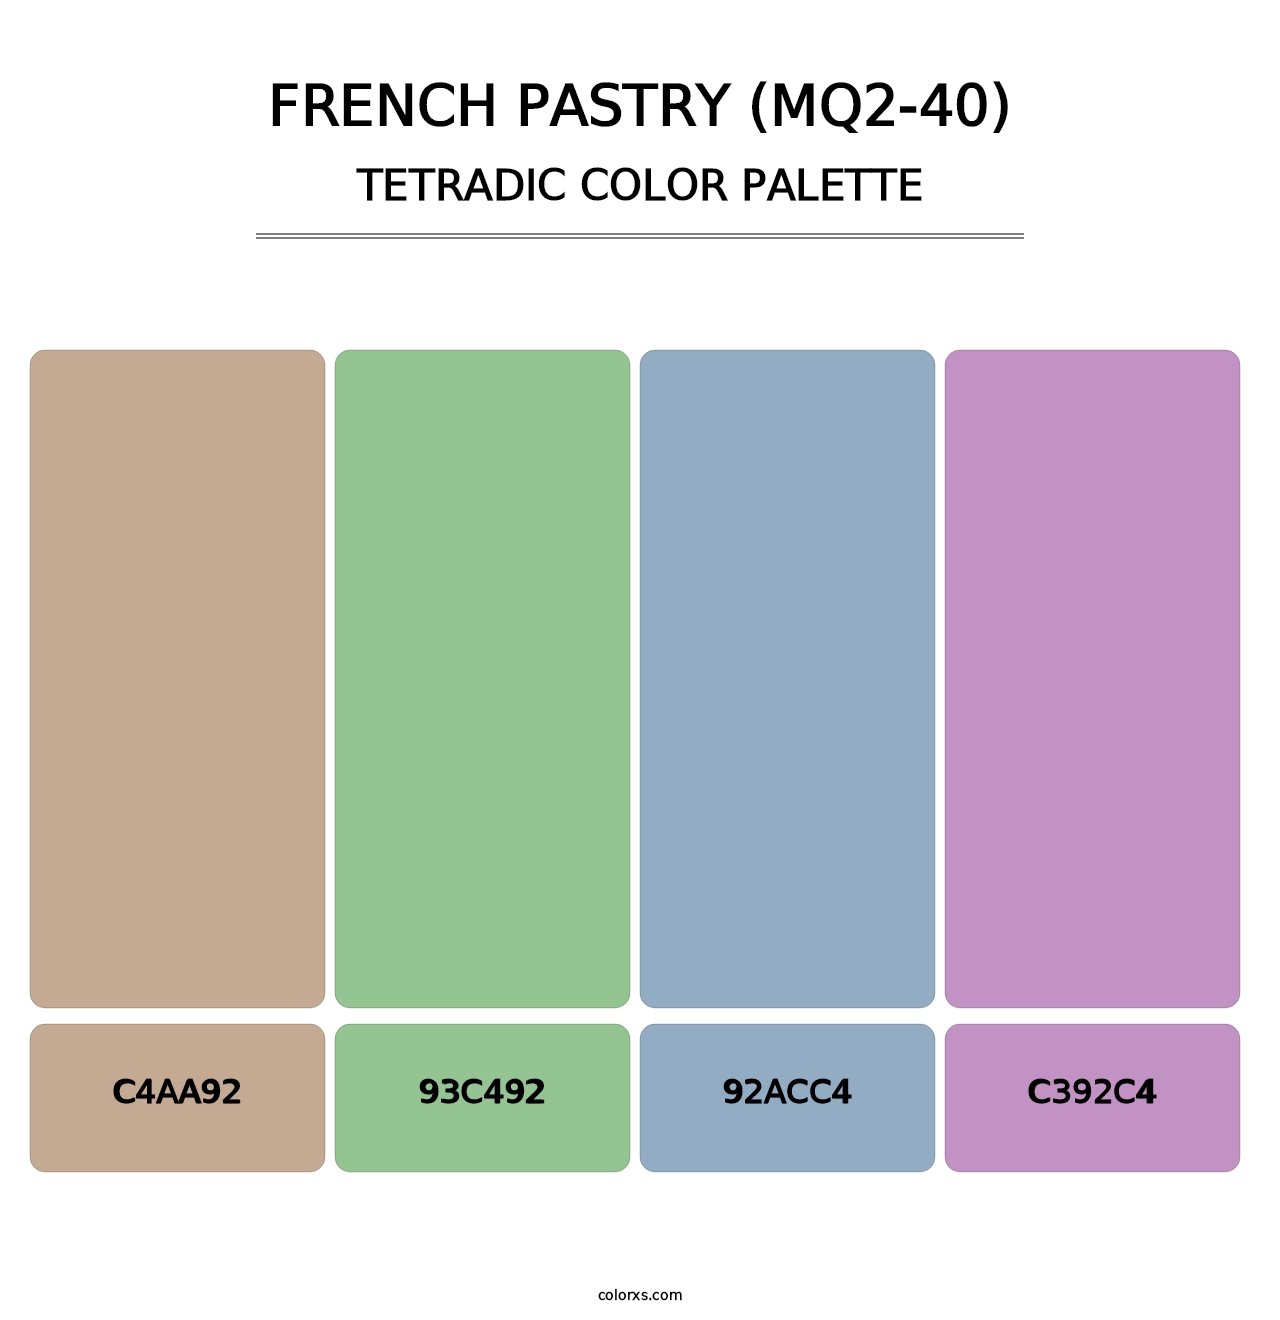 French Pastry (MQ2-40) - Tetradic Color Palette